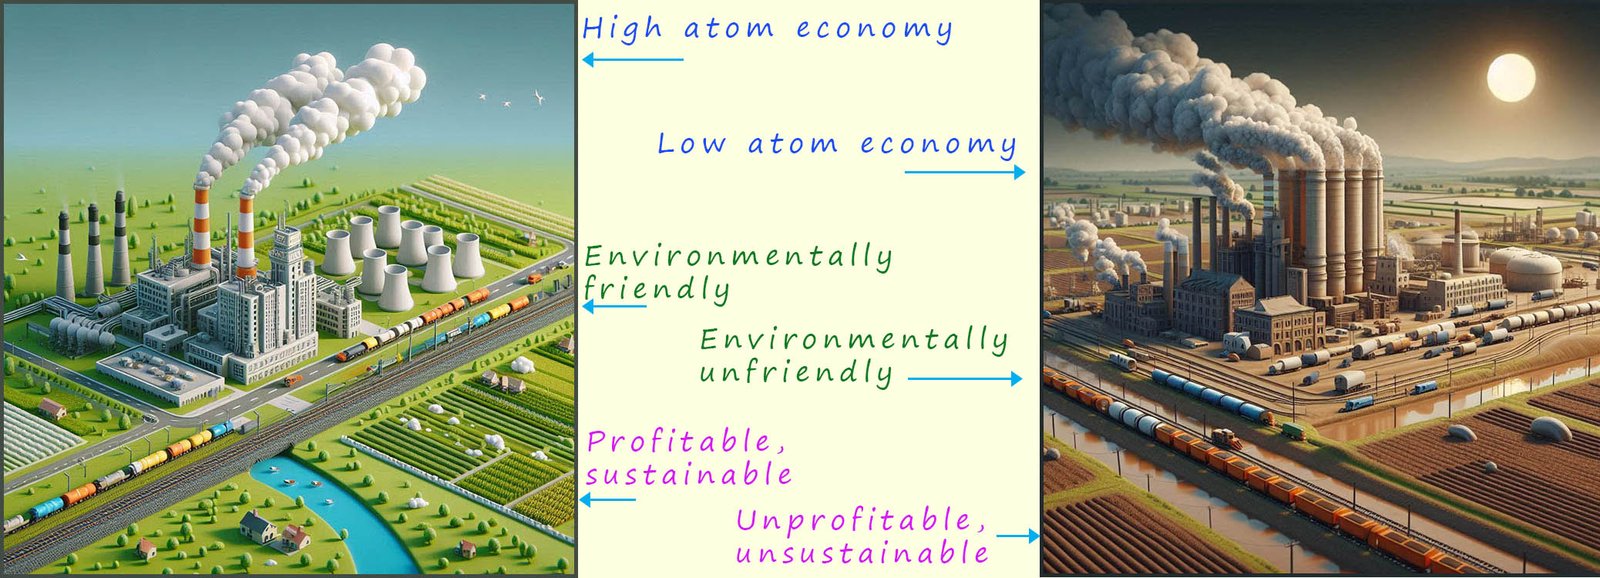 An image which compares chemical factories with high and low atom economies and which are sustainable and environmentally friendly.